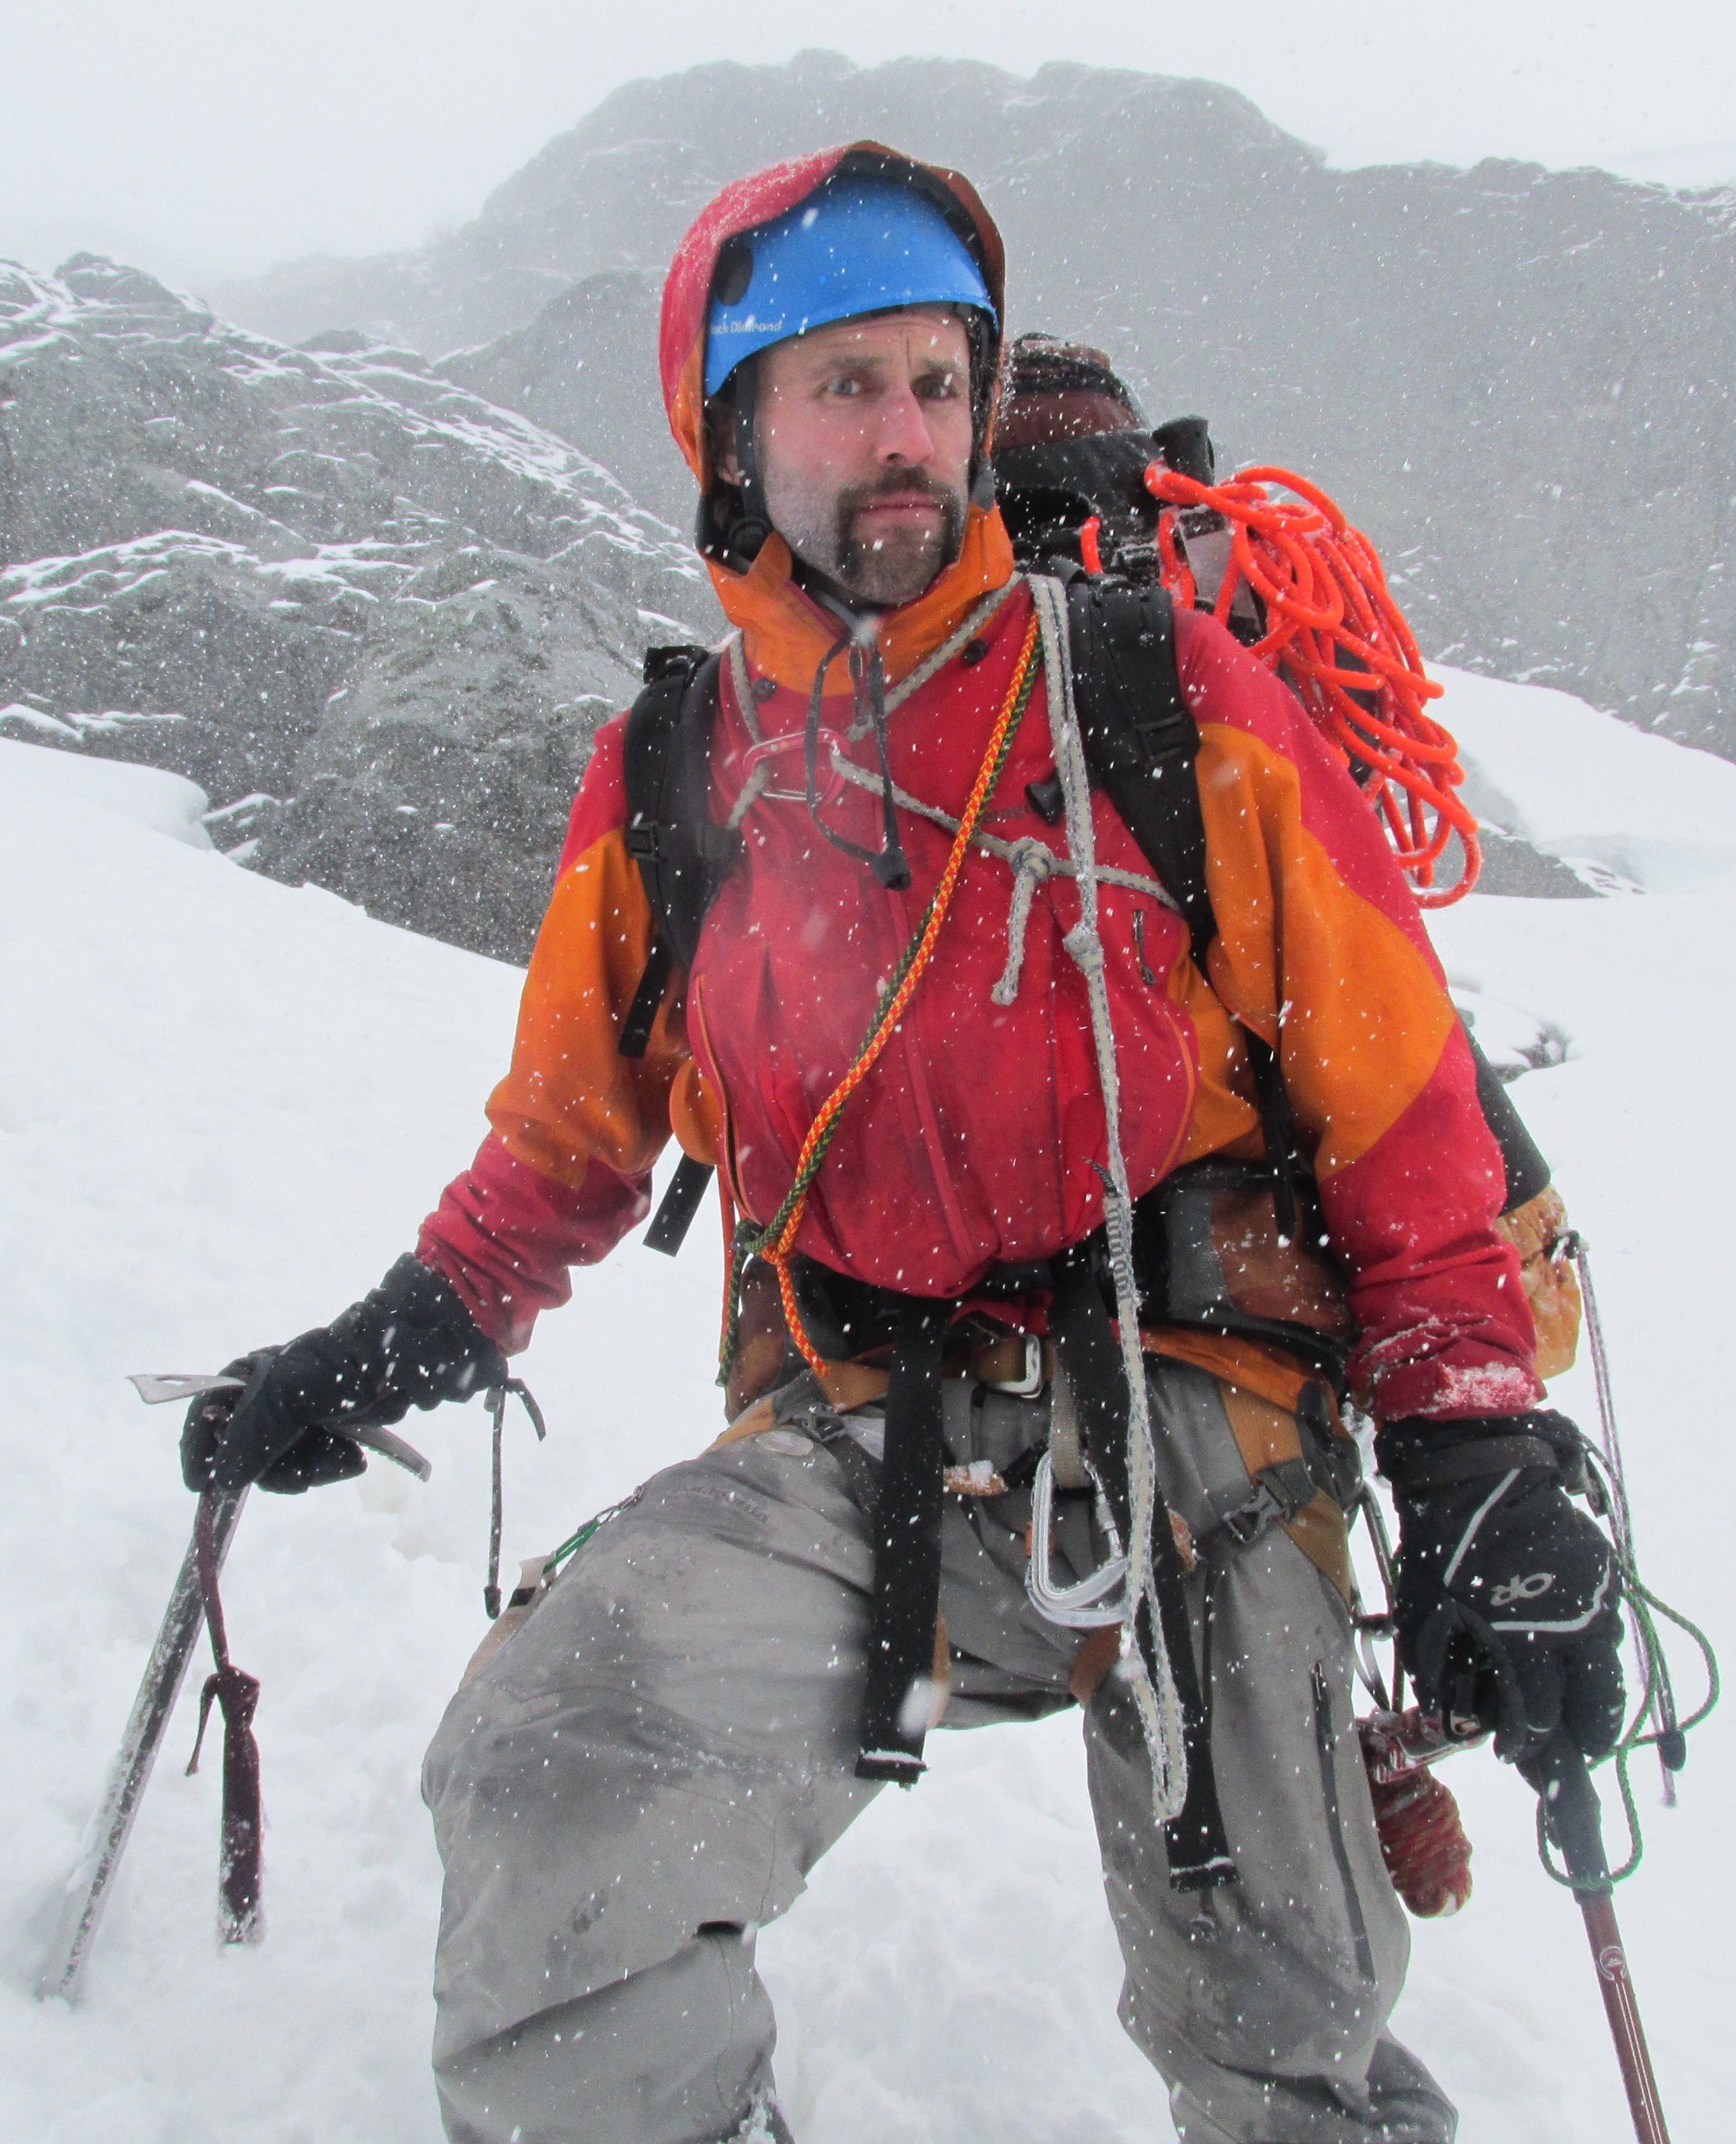 jared on a snow slope in North Cascades National Park. Helmet, ice axe, loaded pack, rope, snow, overcast skies